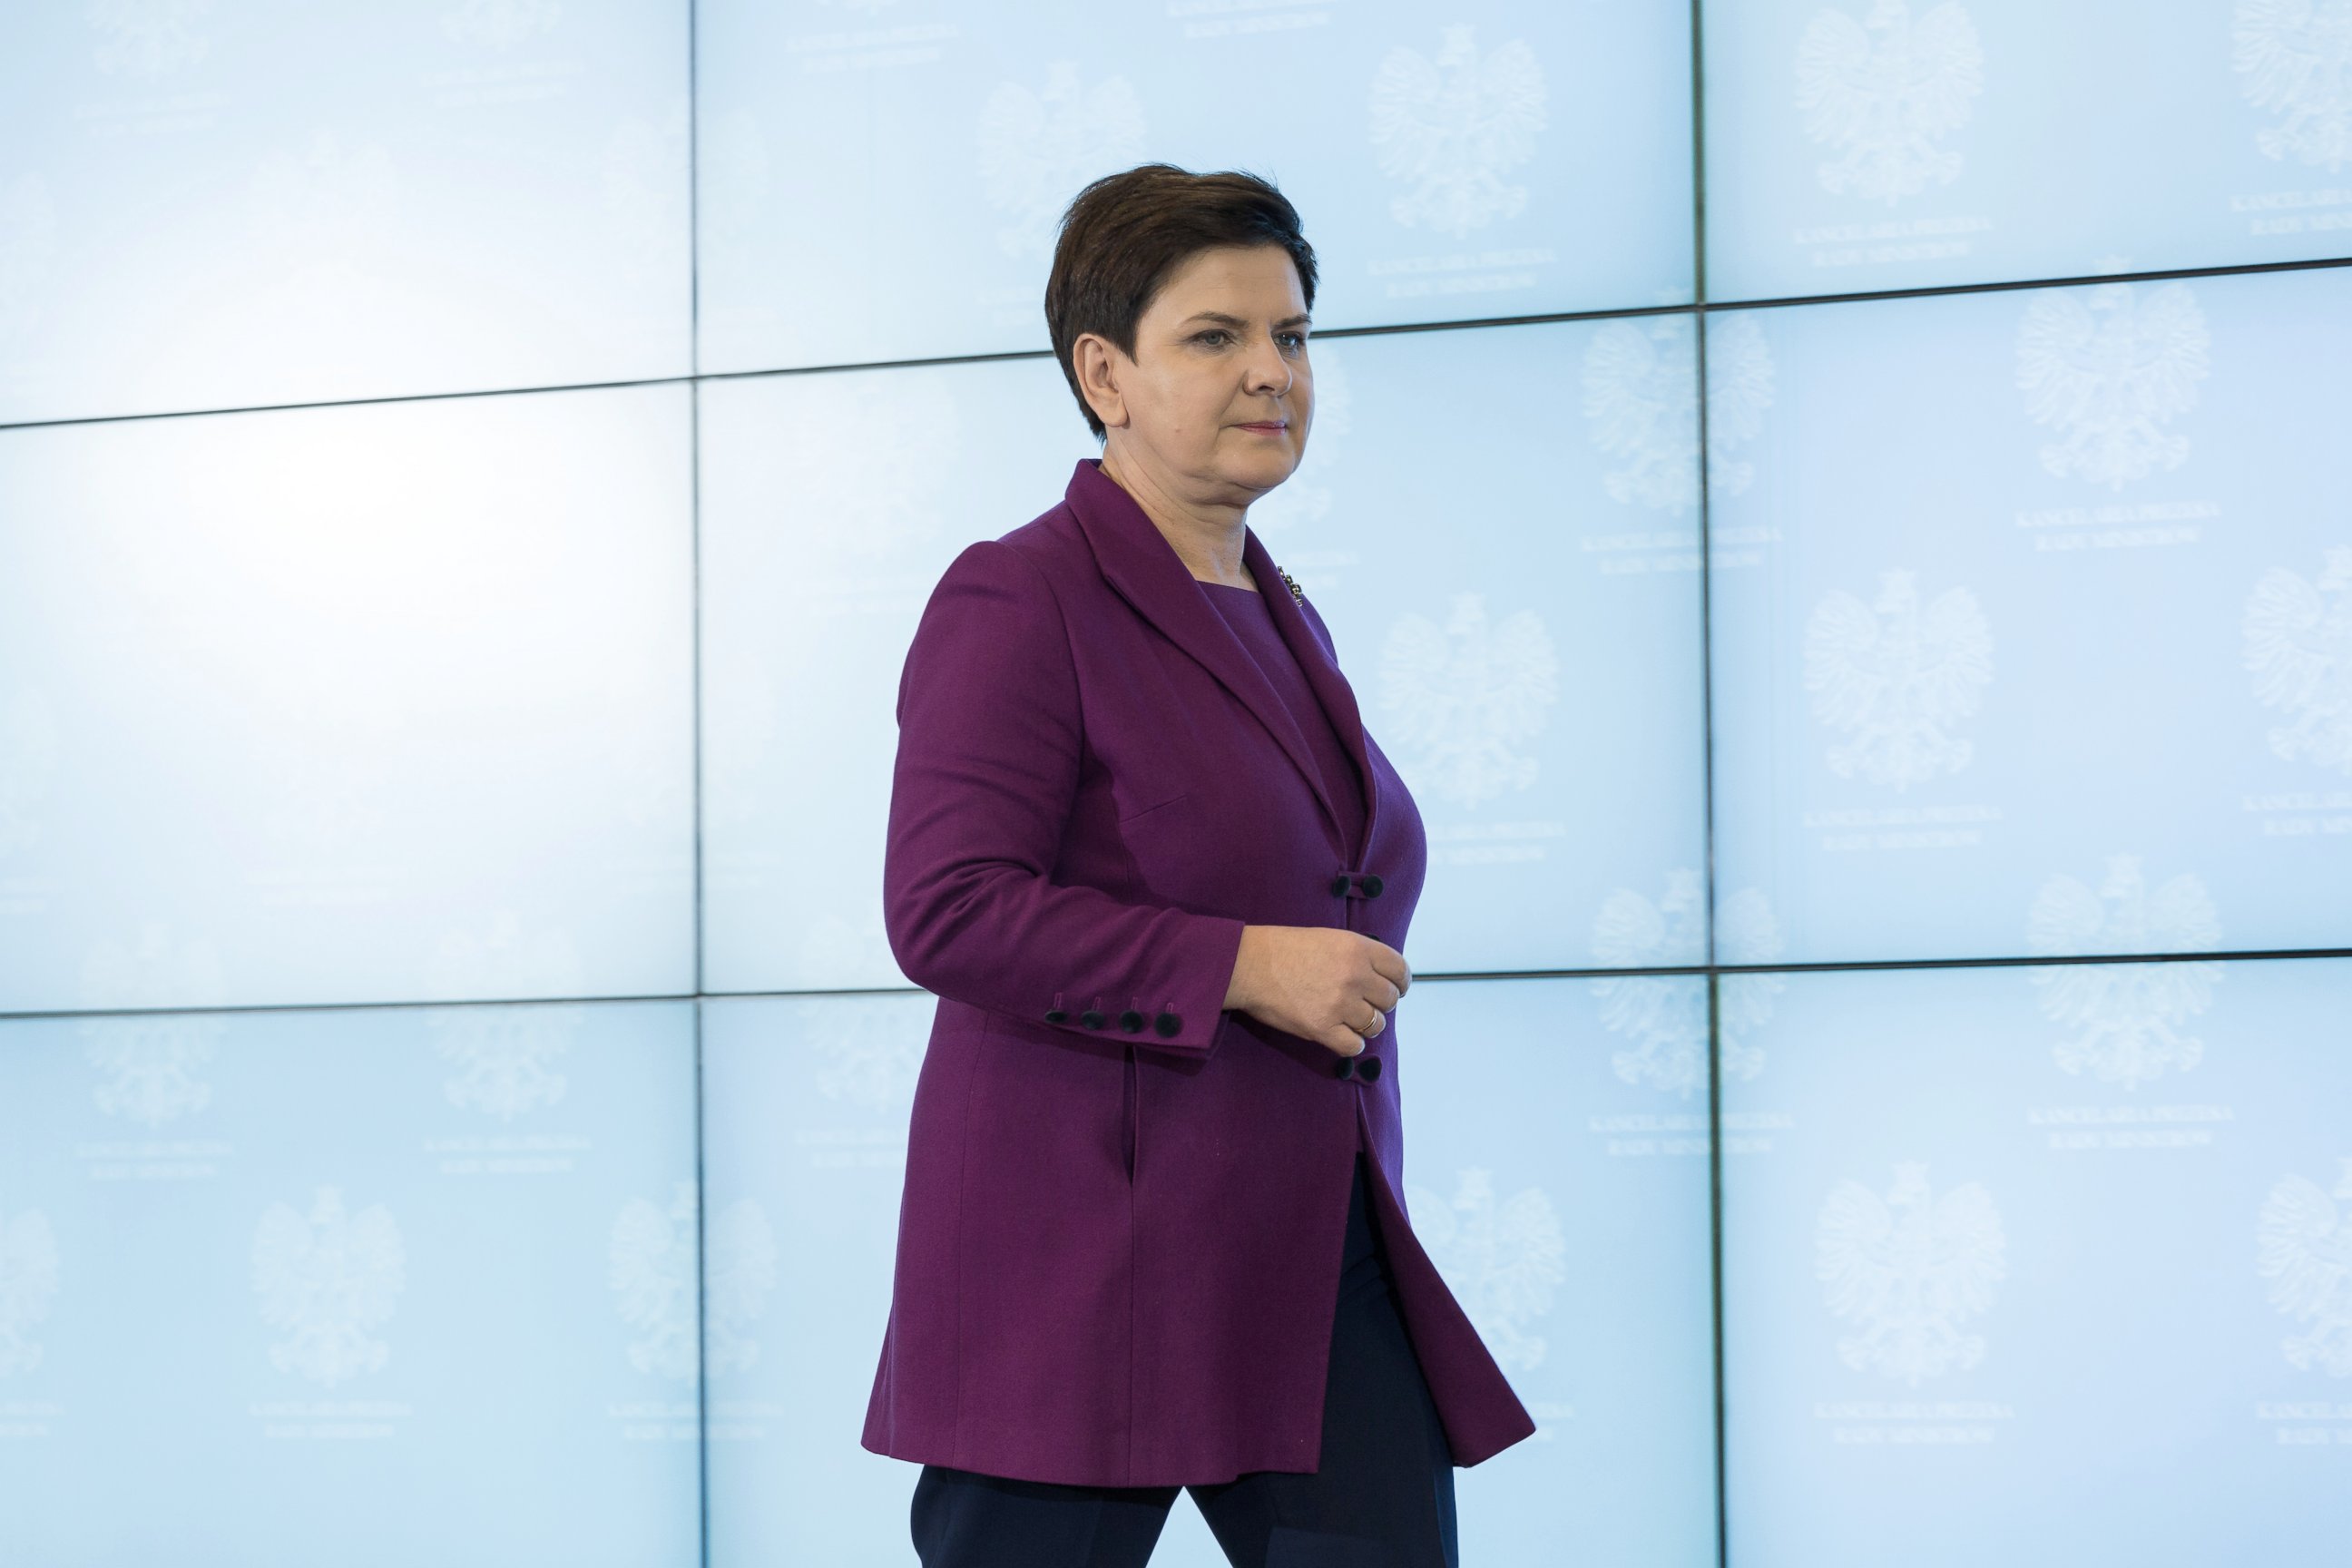 PHOTO: Prime Minister of Poland, Beata Szydlo during the press conference at Chancellery of the Prime Minister in Warsaw, Poland, Oct. 27, 2016.